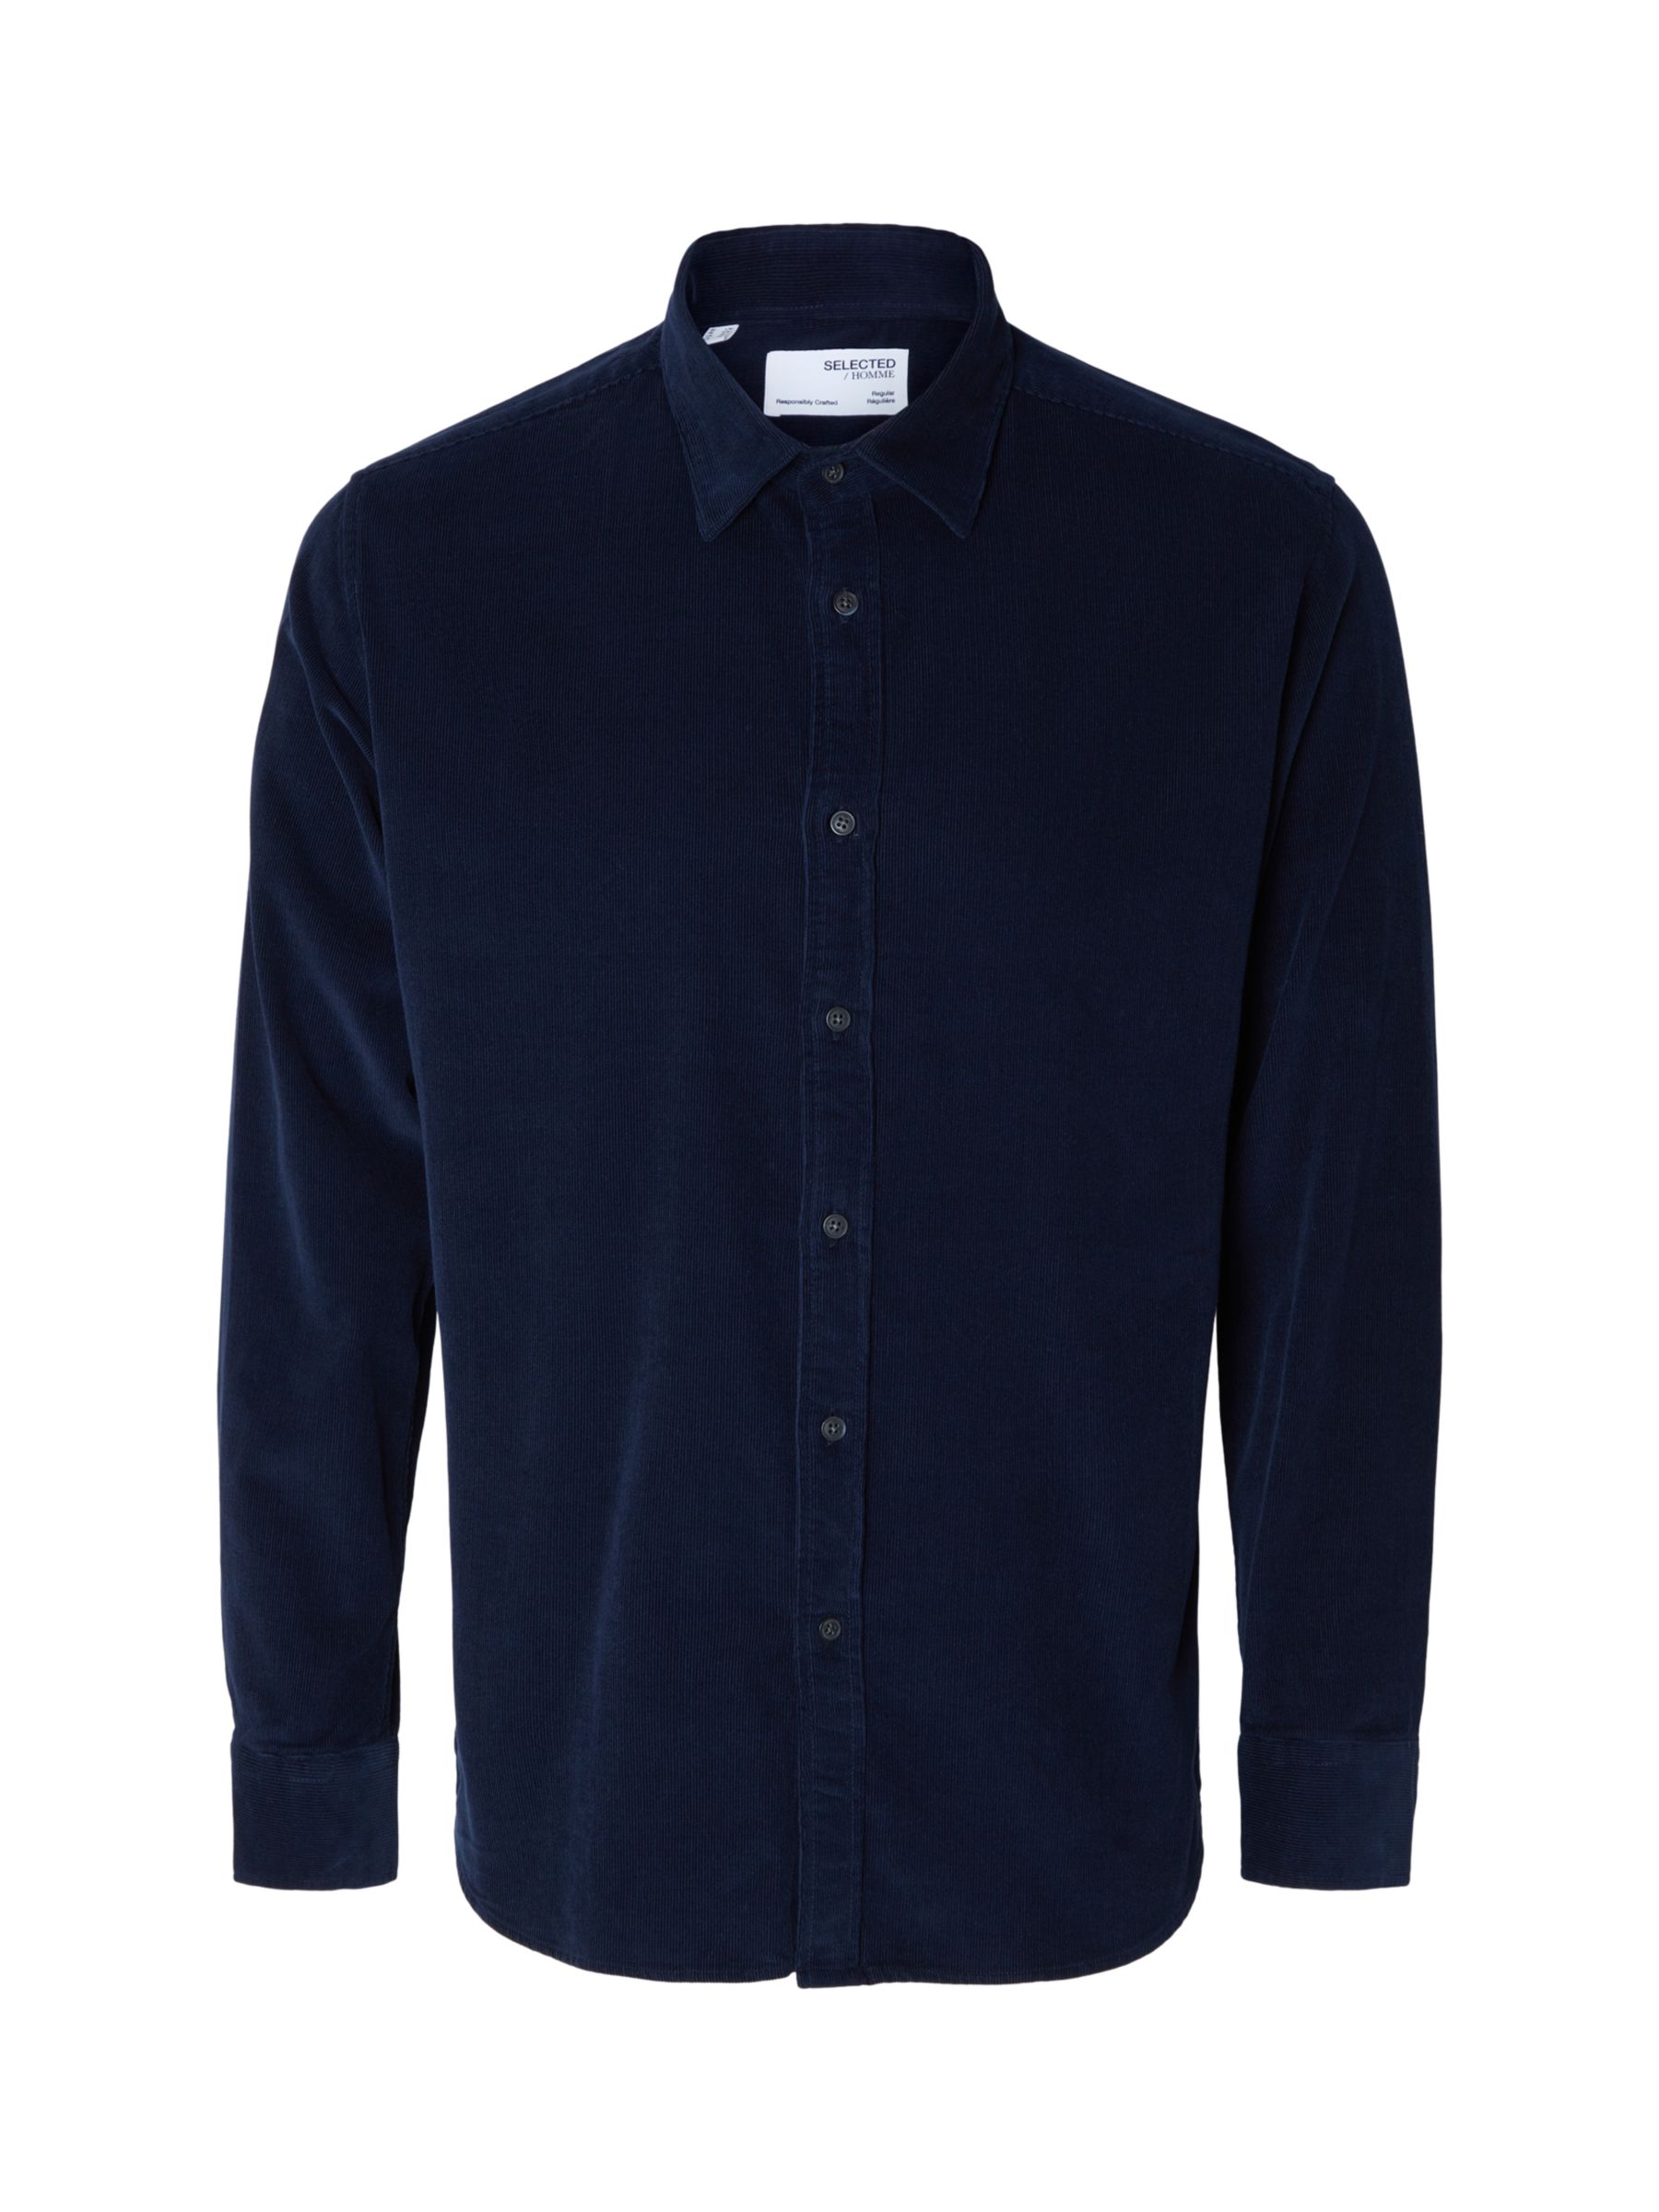 SELECTED HOMME Owen Recycled Cotton Corduroy Shirt, Navy Blazer, M